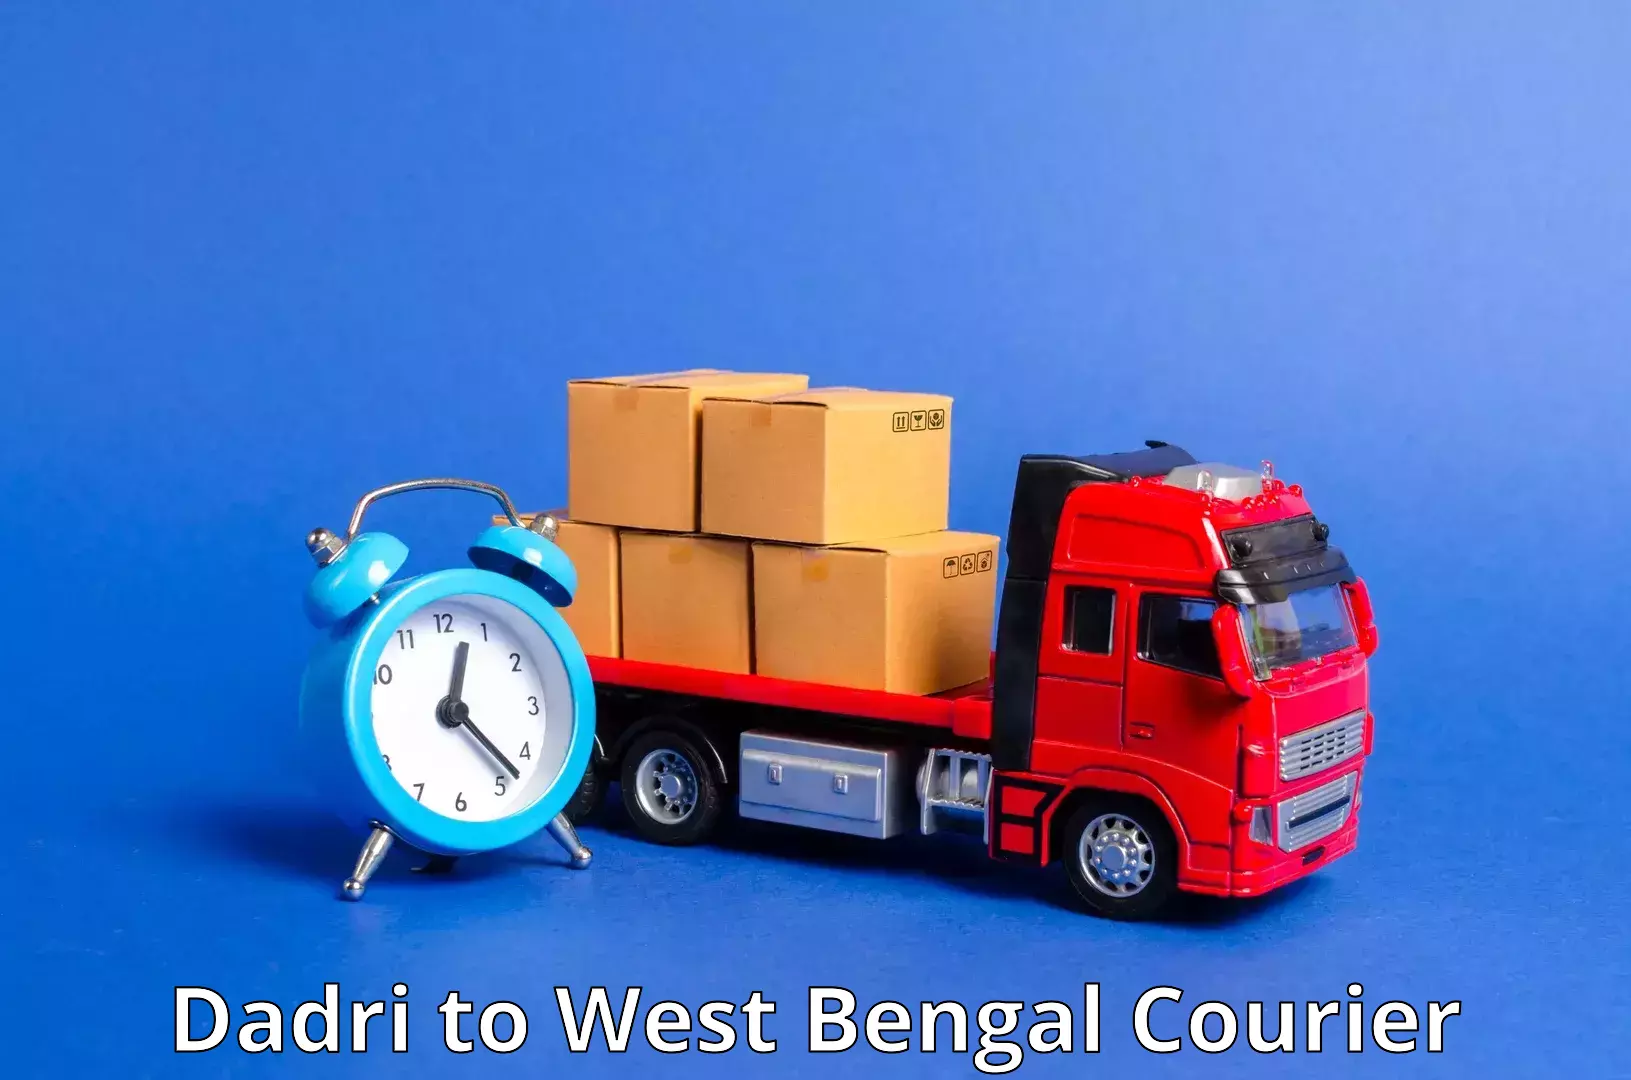 Subscription-based courier Dadri to West Bengal